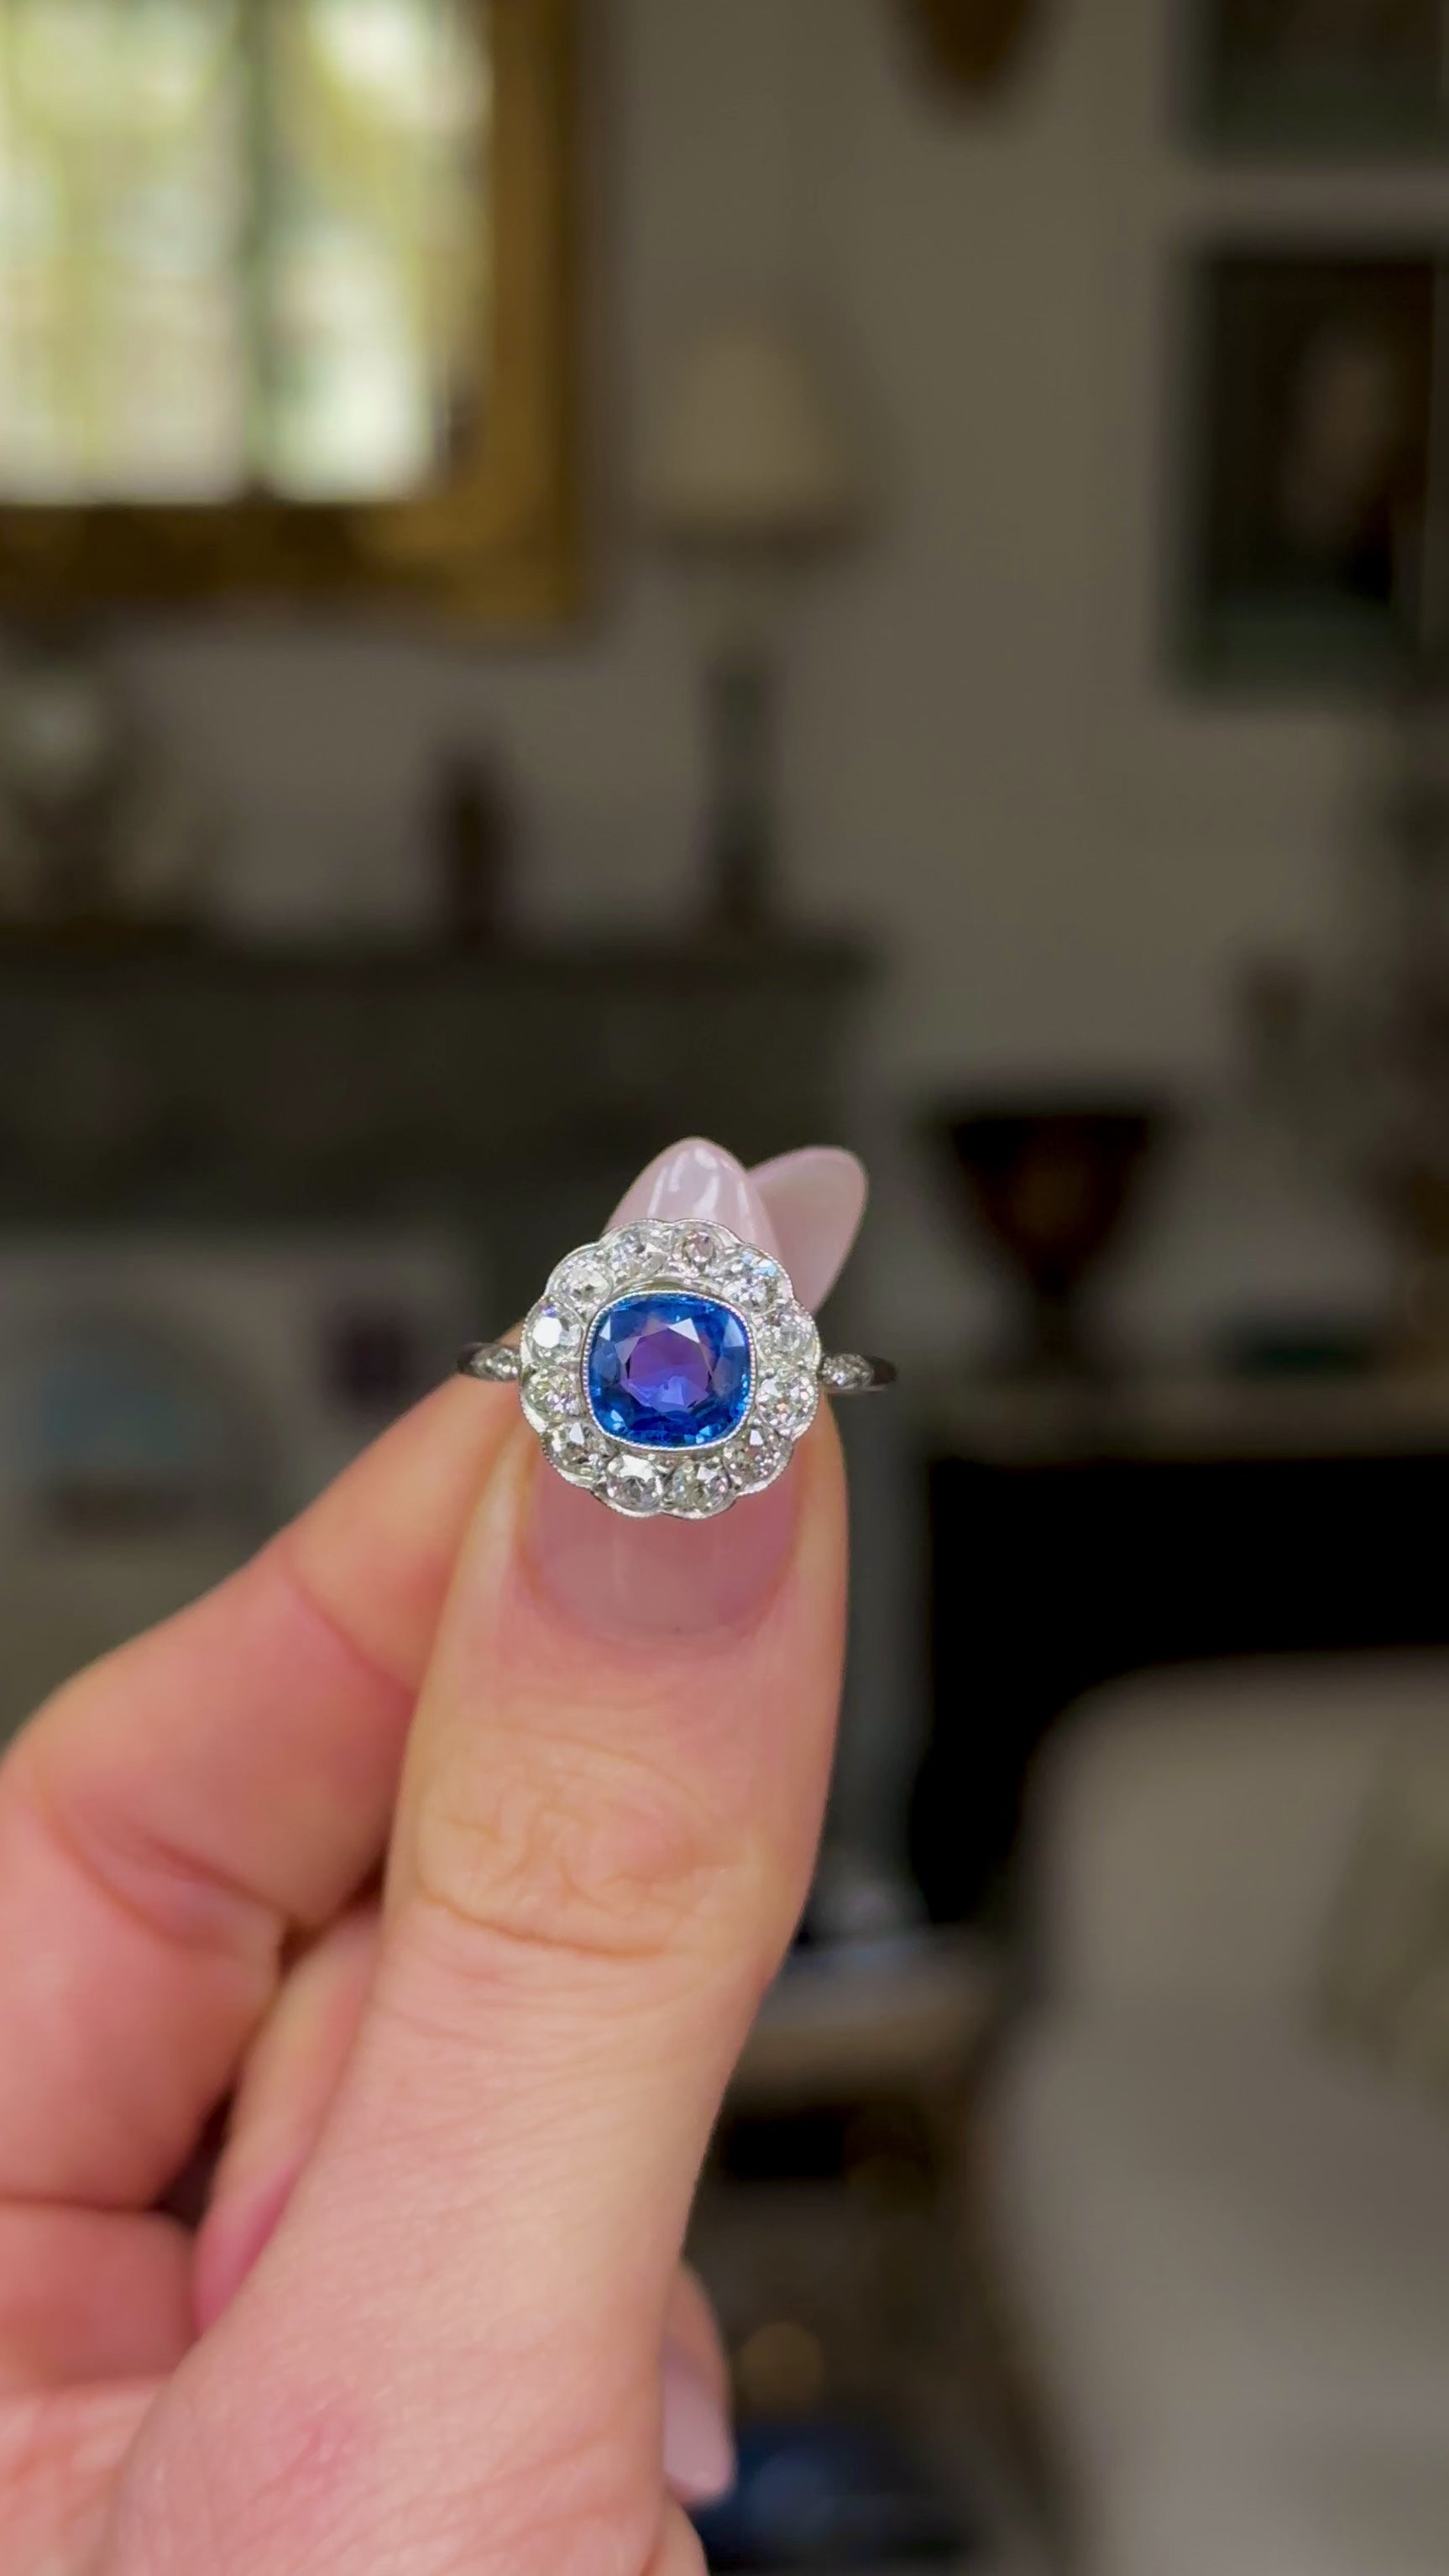 Vintage, 1940s Ceylon Cushion-Cut Sapphire and Diamond Cluster Engagement Ring, held in fingers and rotated to give perspective.